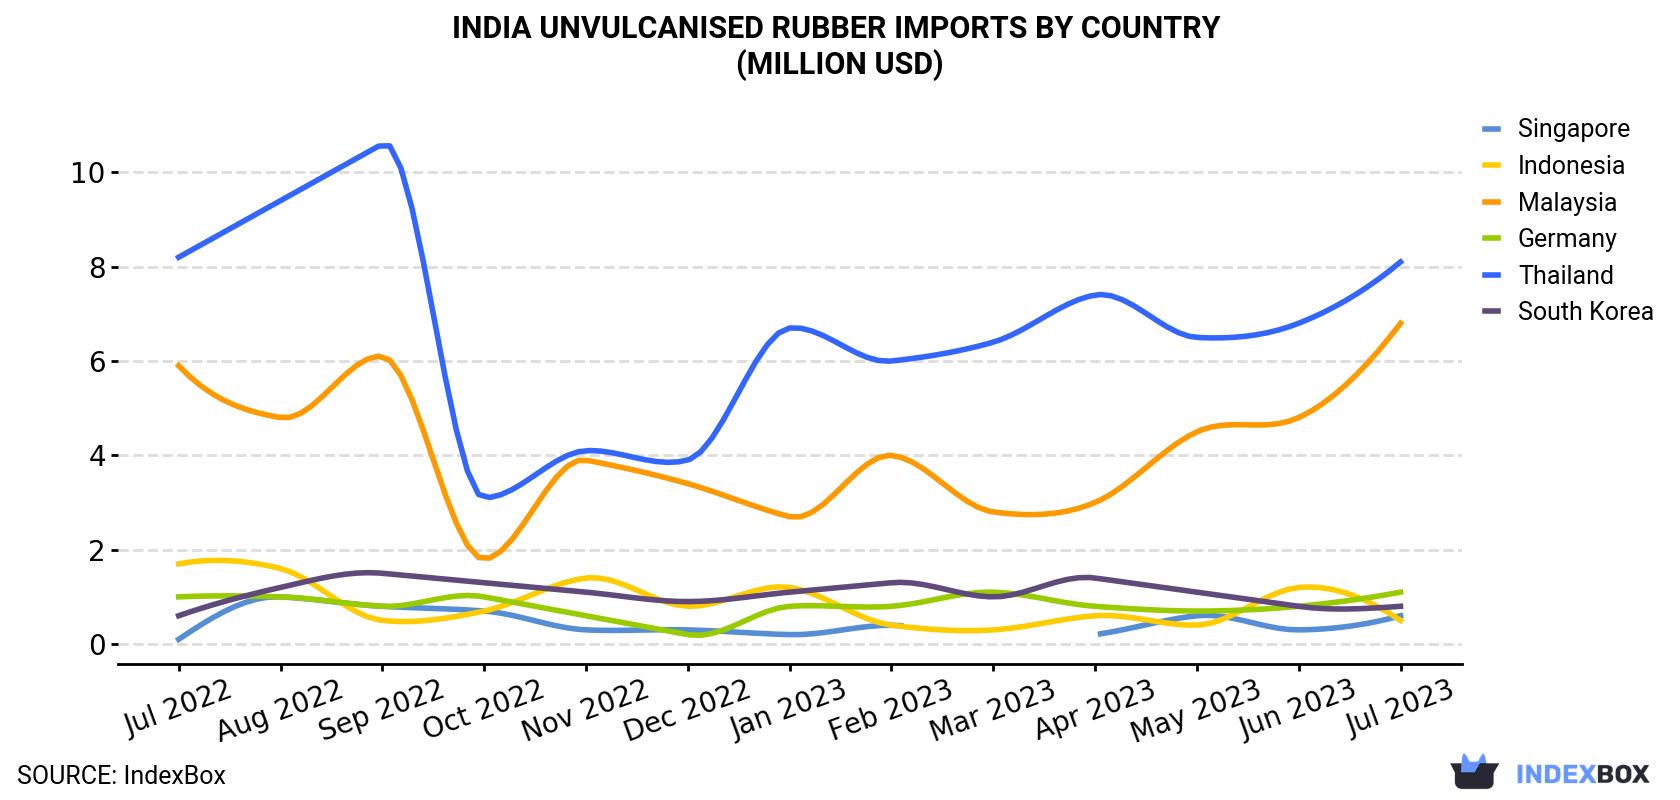 India Unvulcanised Rubber Imports By Country (Million USD)